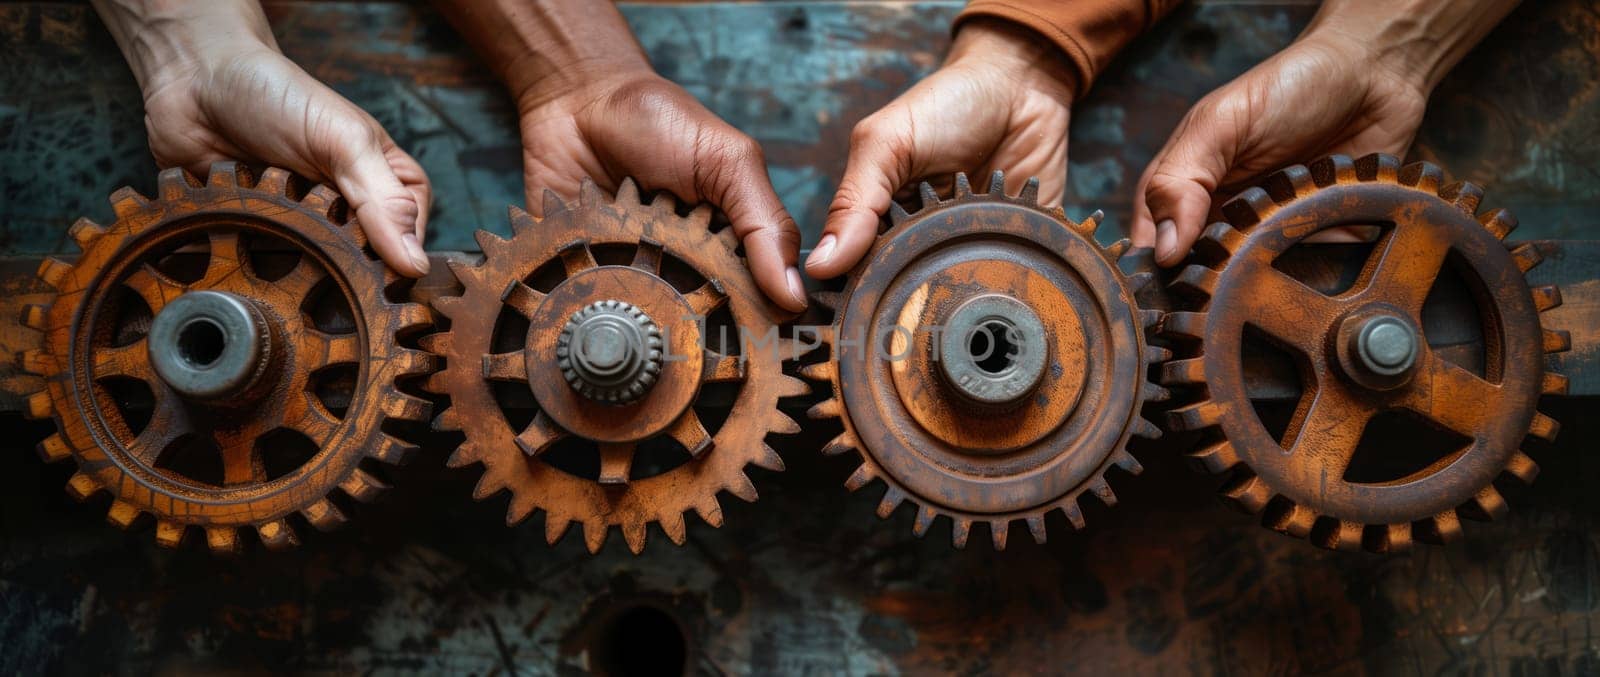 The person is holding a row of rusty gears, which are components used in automotive tire, rim, and wheel systems. Gears are also found in bicycles, machines, and other engineering applications